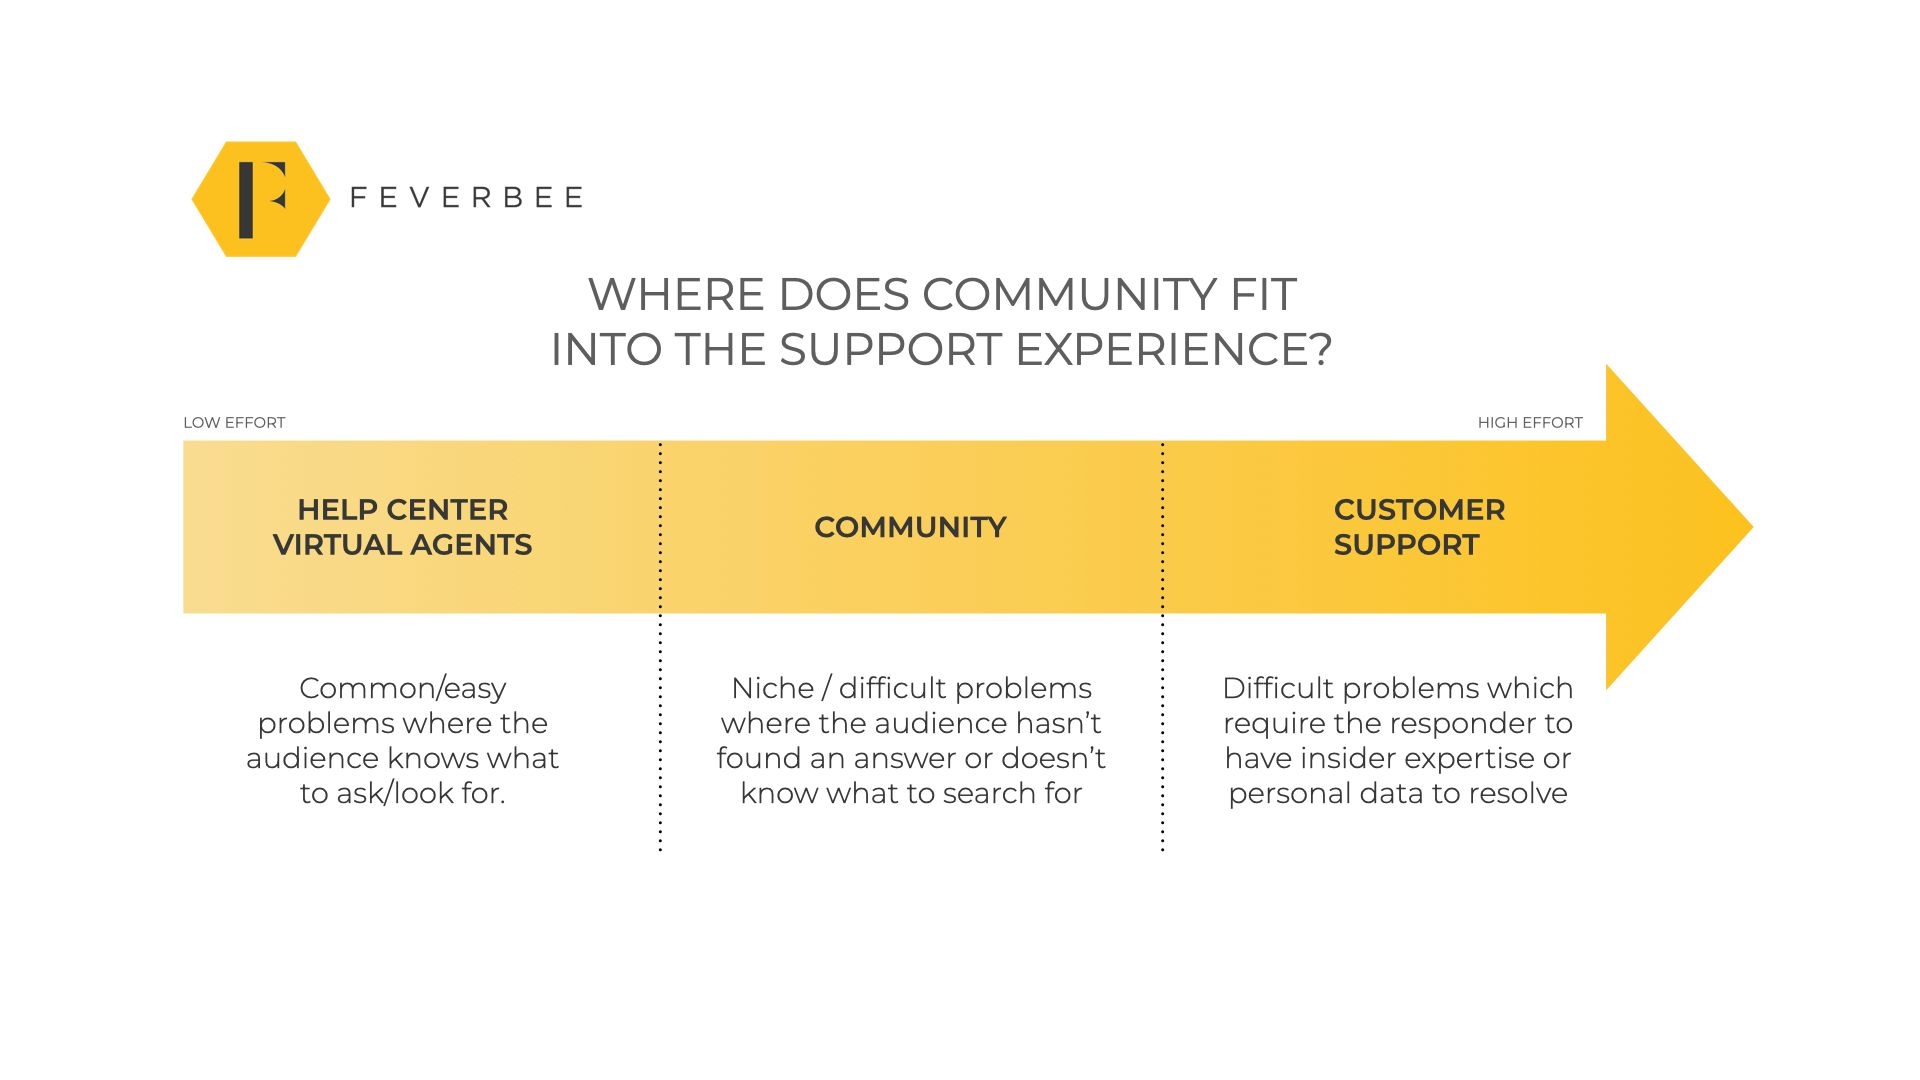 Where does community fit into the support experience